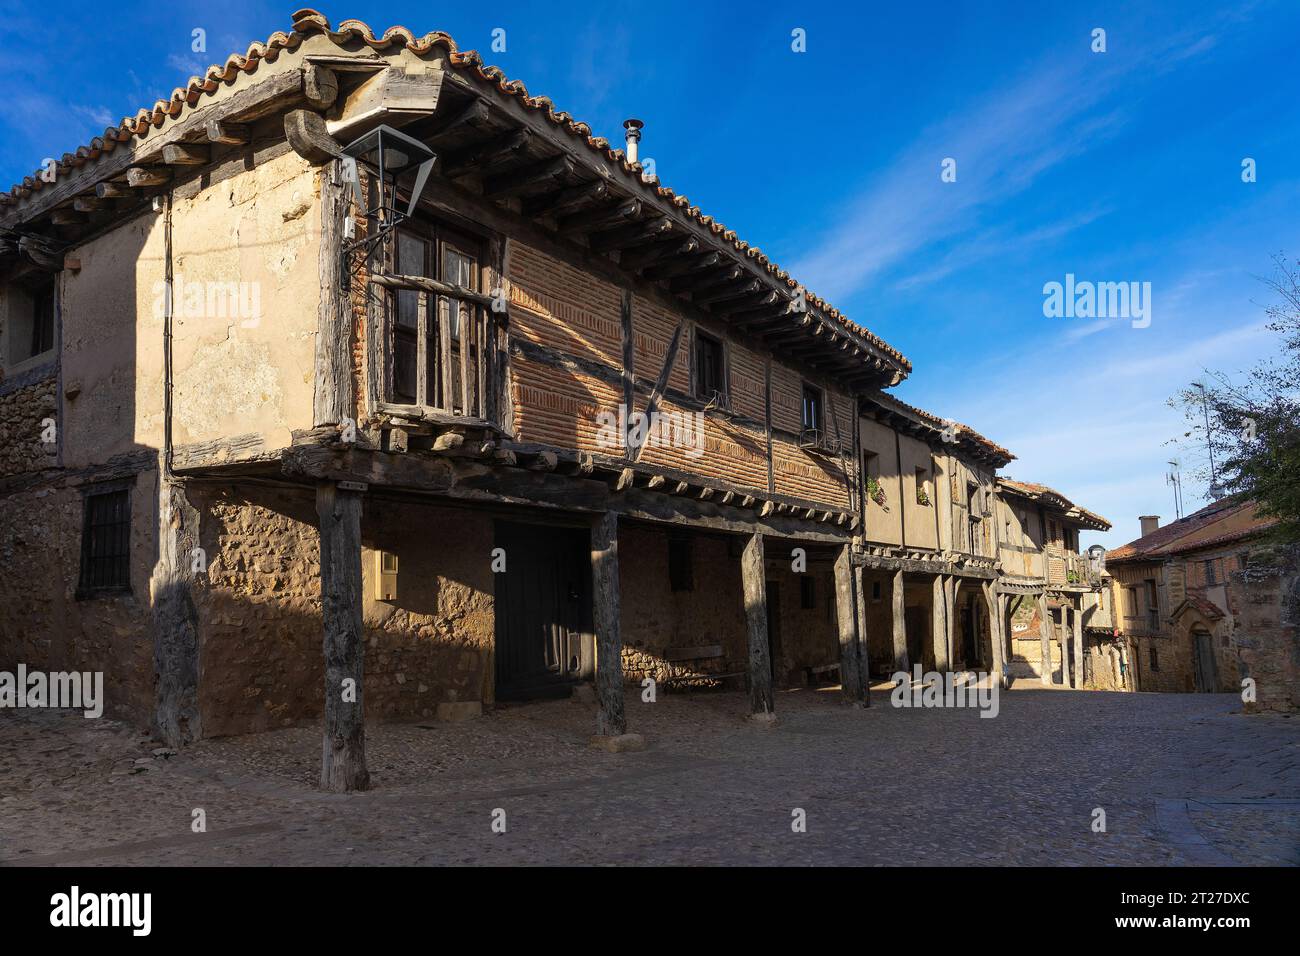 View of the traditional houses of the medieval village of Calatañazor in a sunny day, Soria, Castilla y Leon, Stock Photo